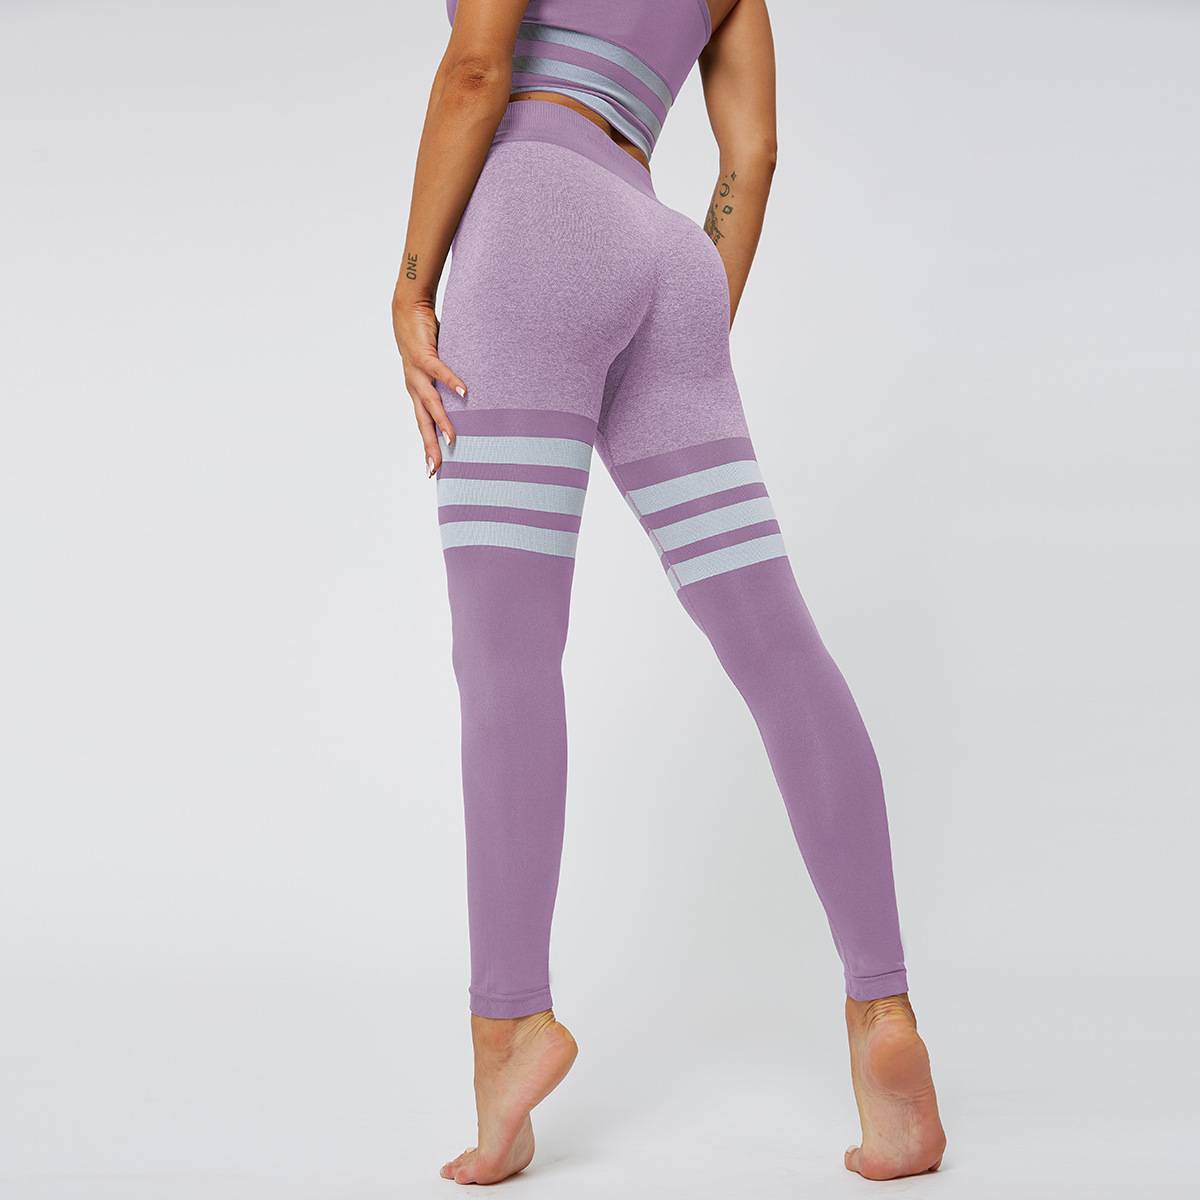 Sexy Peach Hip High Waist Yoga Pants Women39s Knitted Seamless Breathable Striped Yoga Fitness Leggingspicture22